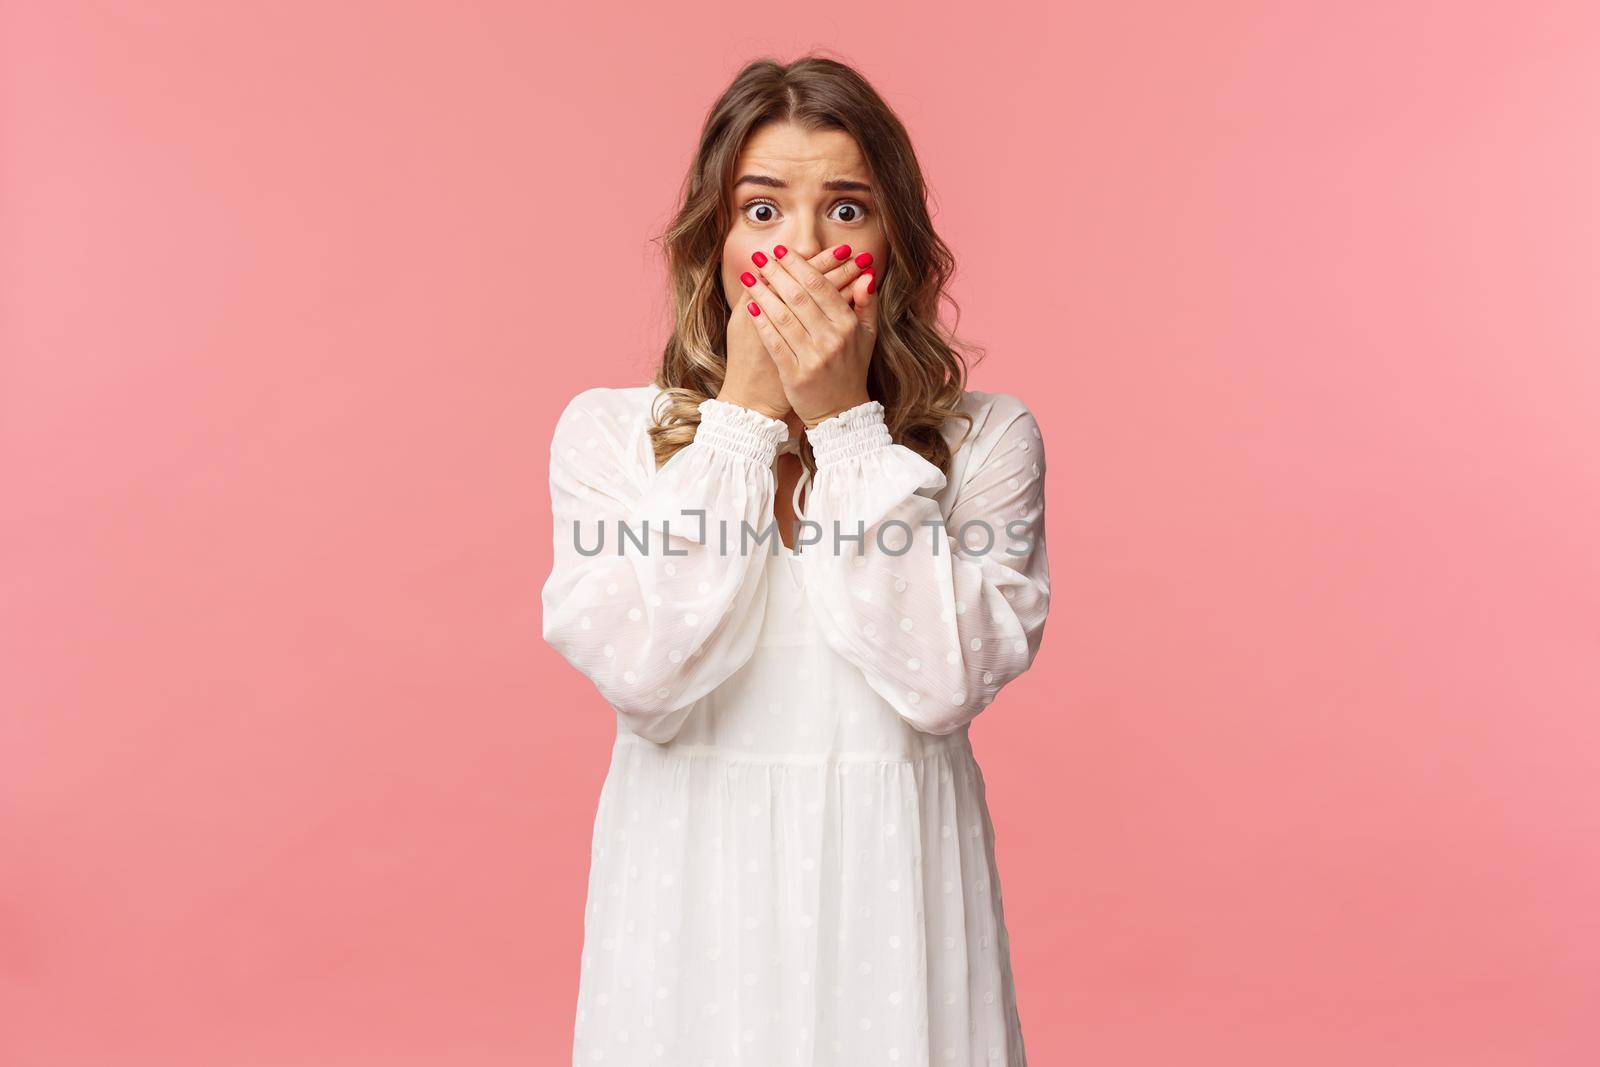 Shocked and anxious young concerned pretty girl in white dress, gasping close mouth with hands, look worried and startled, express fear or empathy with eyes, standing pink background.